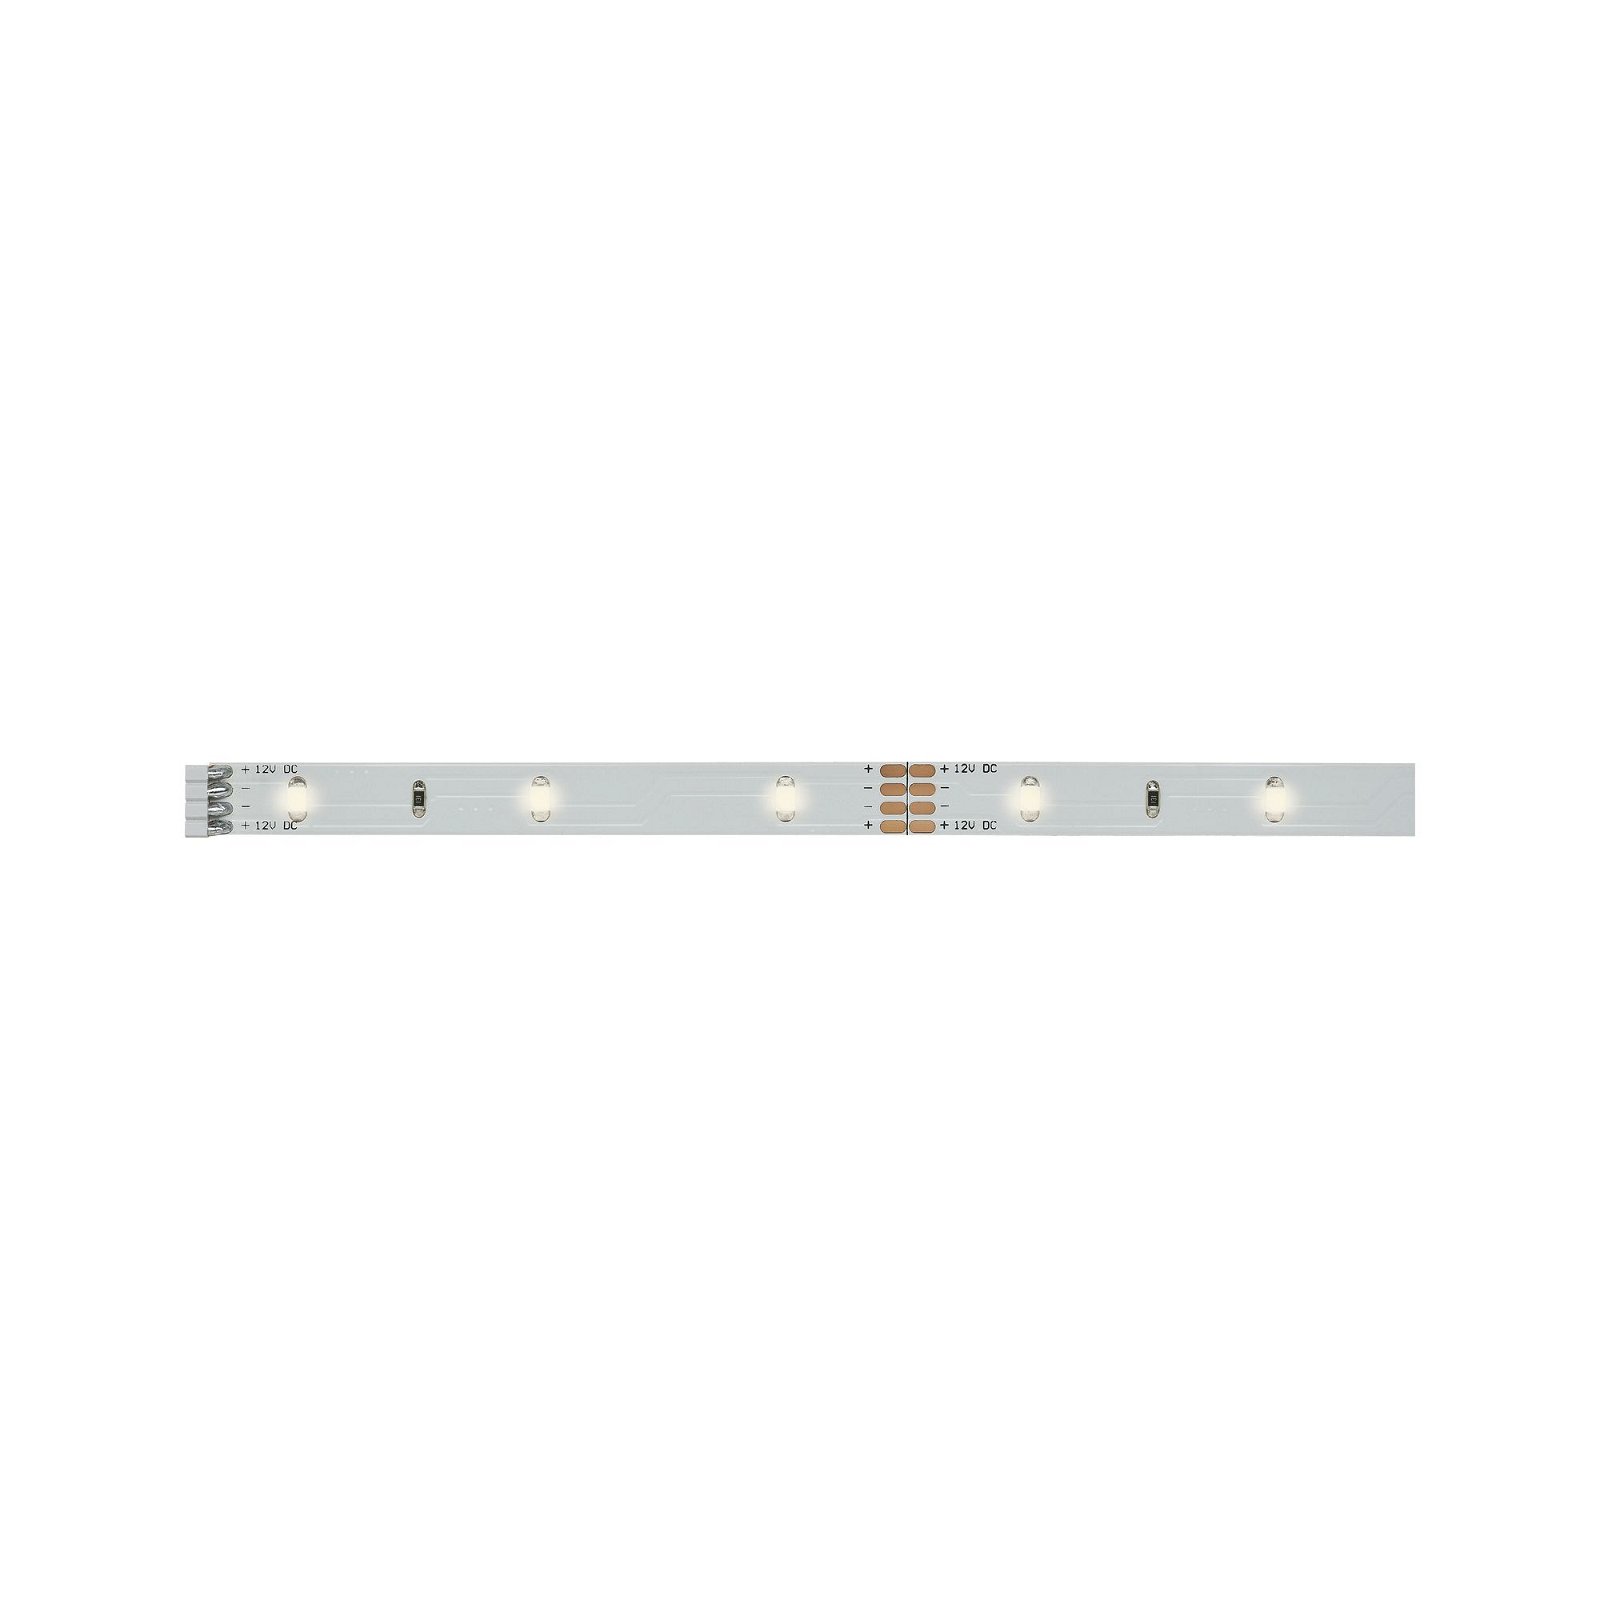 YourLED ECO Strip LED Blanc chaud Strip individuel 1m 2,4W 160lm/m 3000K